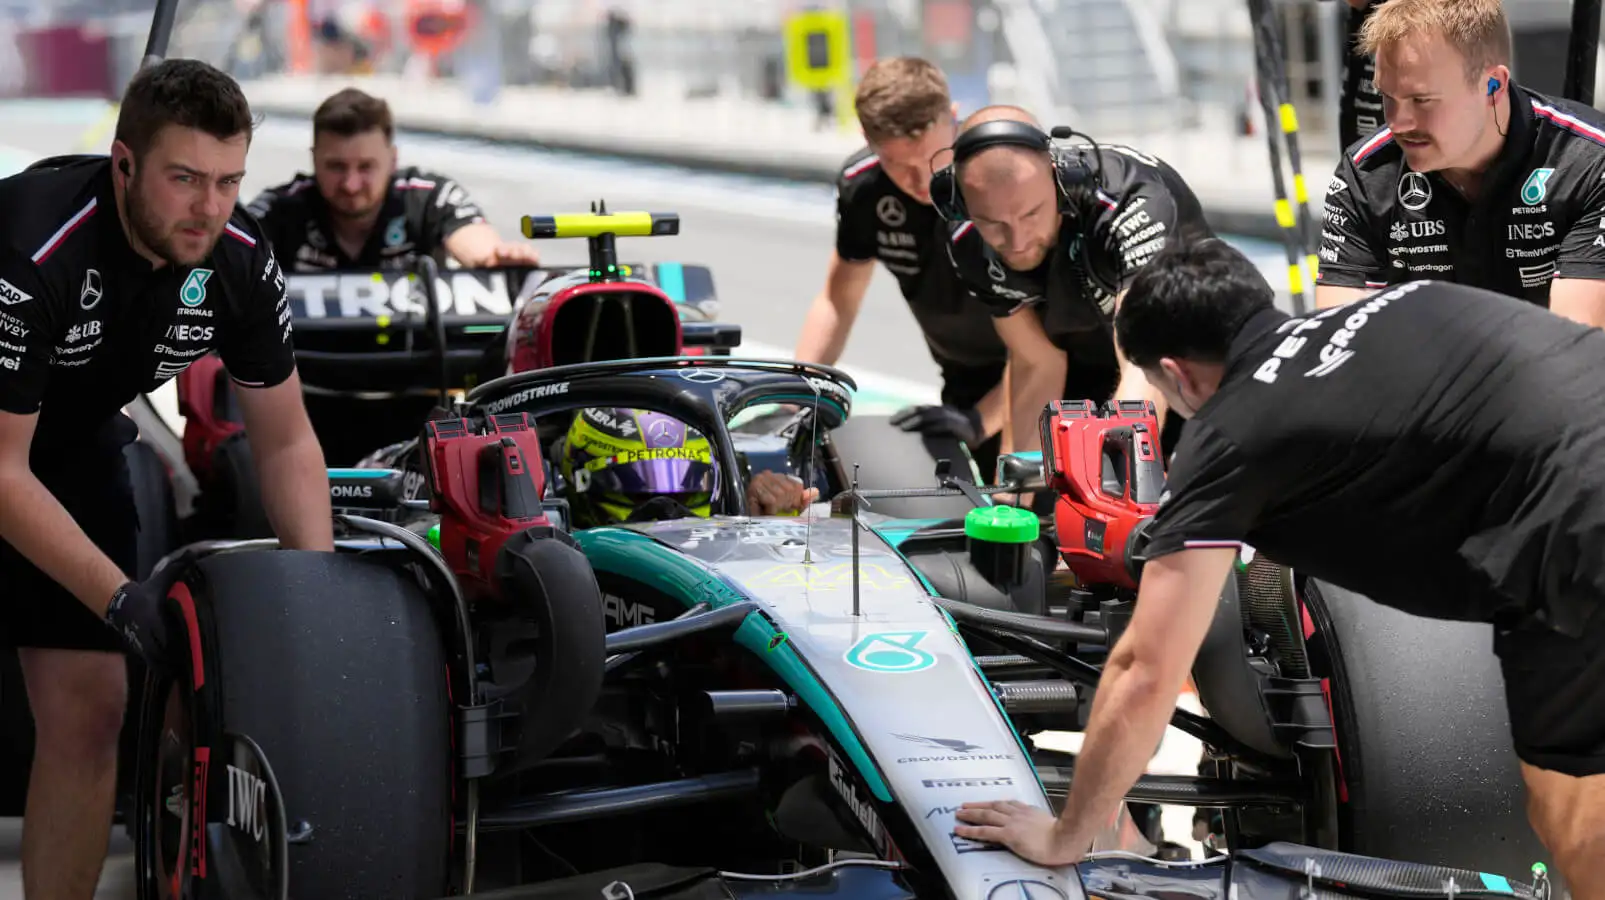 Miami stewards dish out penalties with Mercedes and Valtteri Bottas summoned